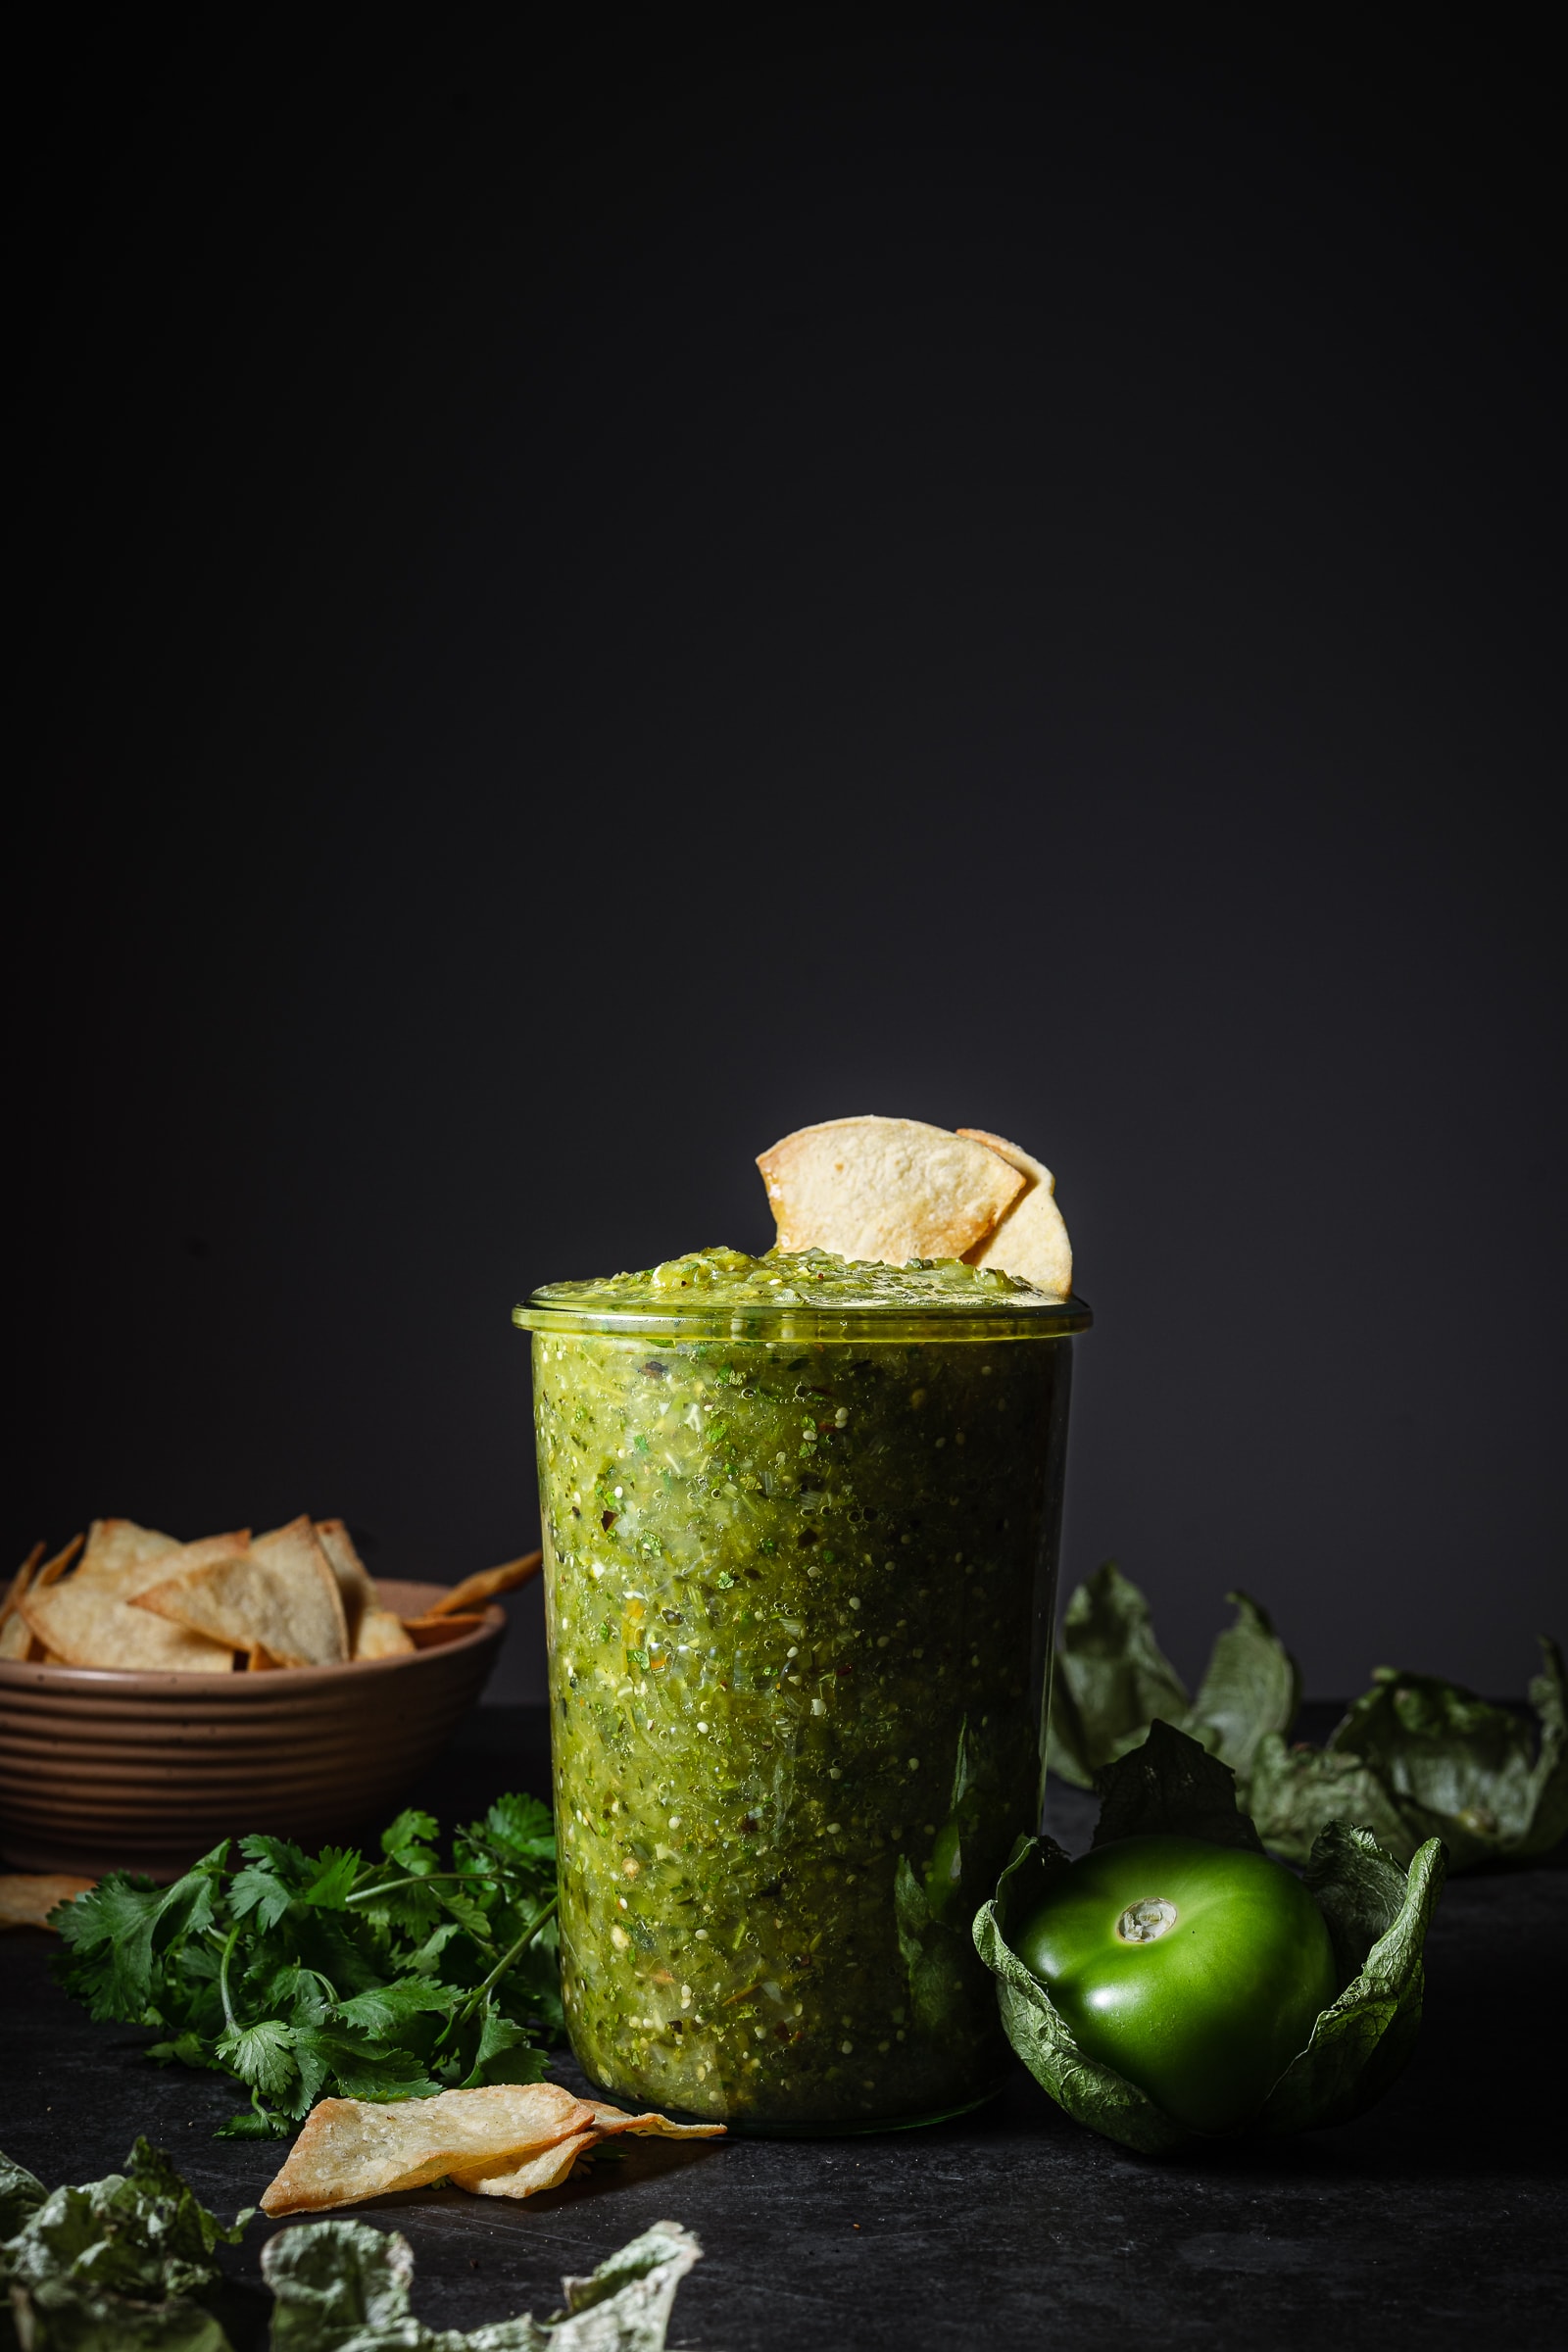 tomatillo green chili salsa in a glass jar with chips.